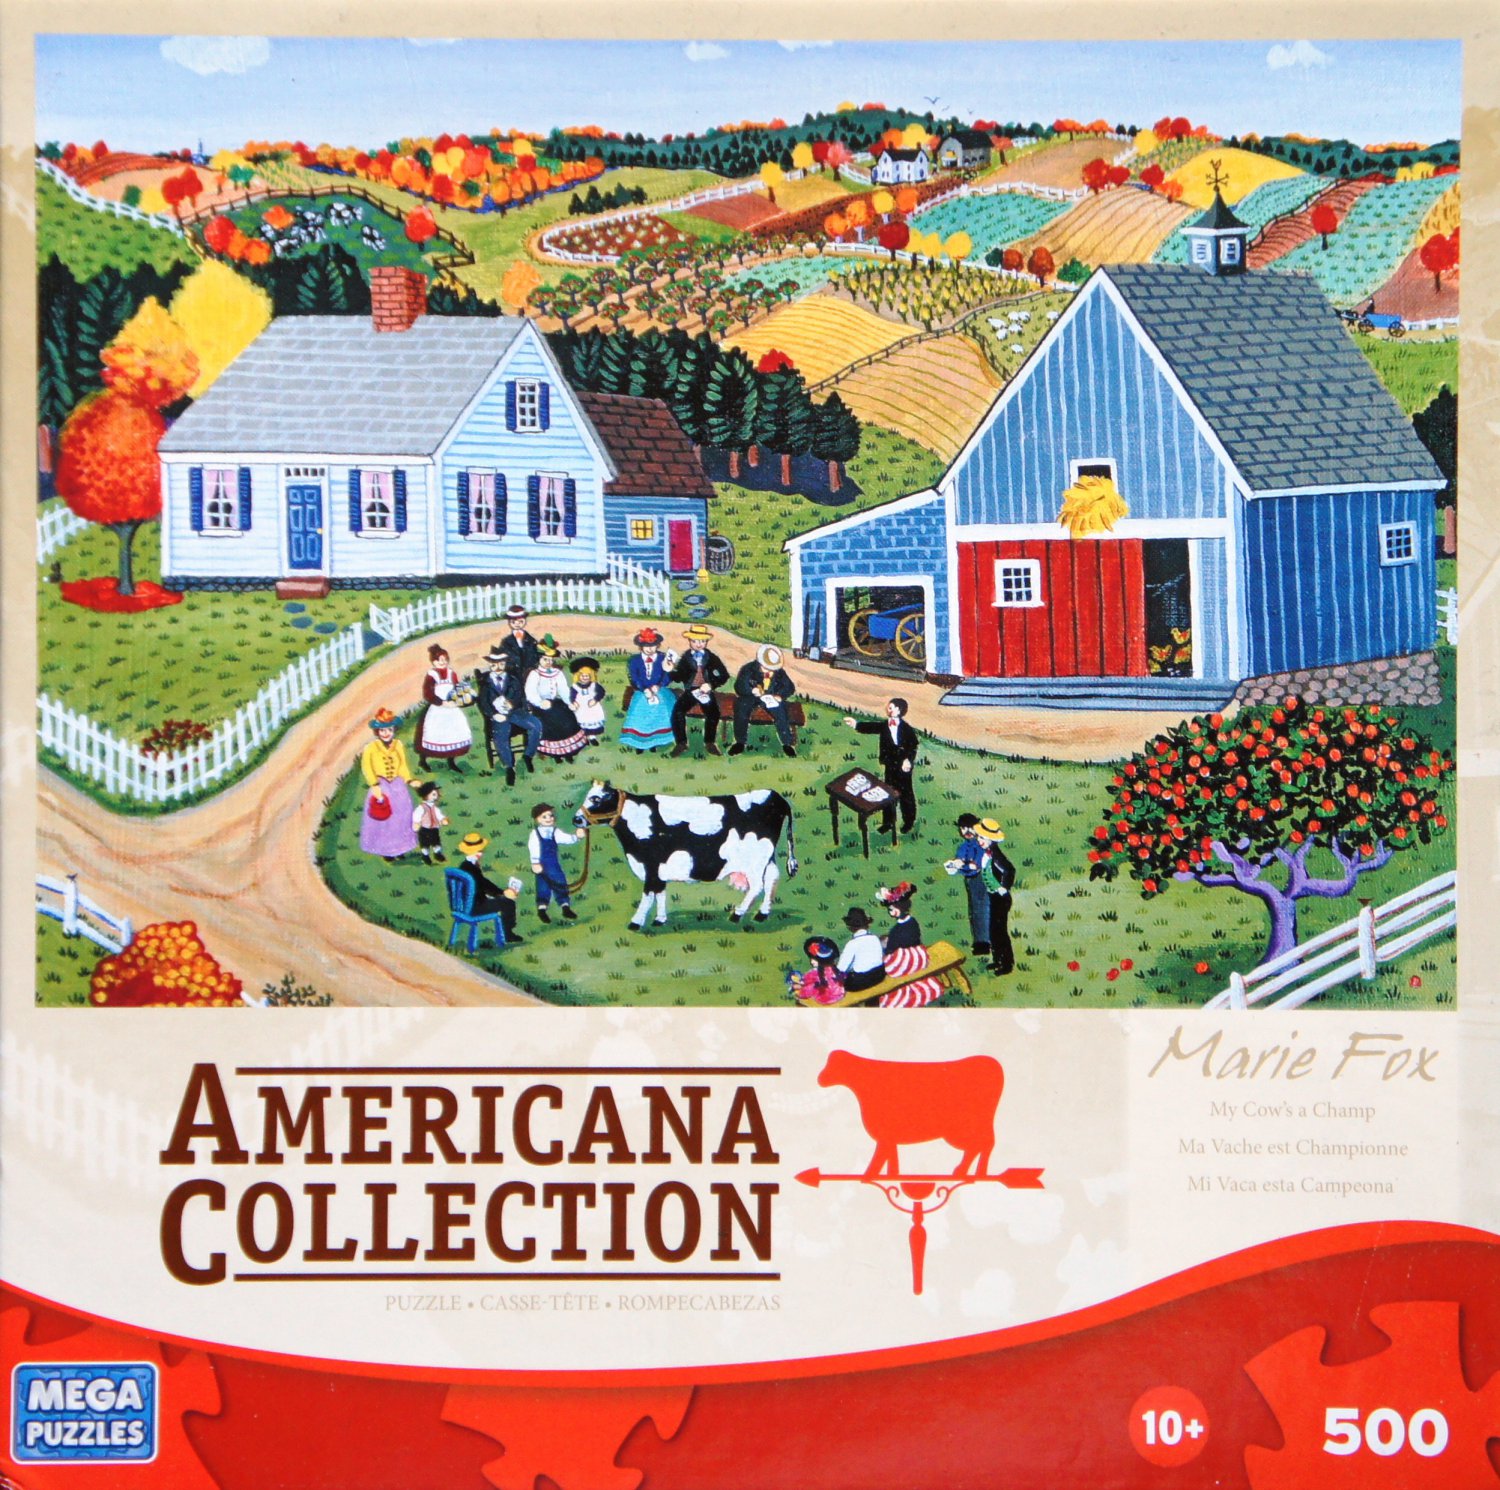 AMERICANA COLLECTION My Cow's a Champ by Marie Fox 500 Piece Jigsaw Puzzle